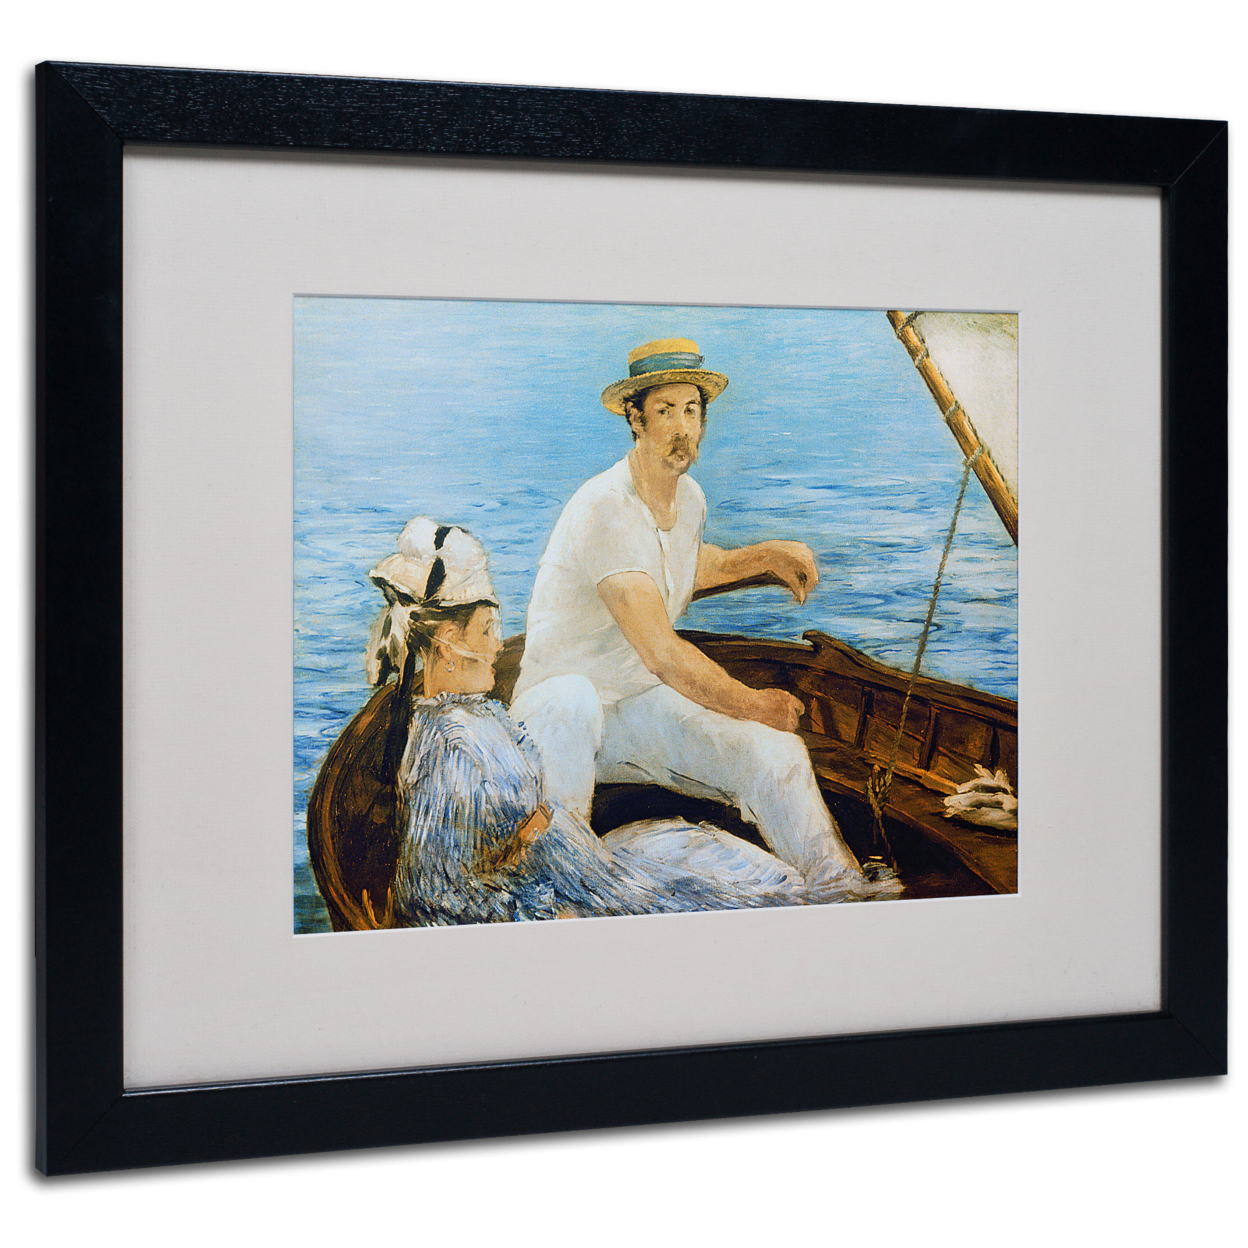 Edouard Manet 'Boating 1874' Black Wooden Framed Art 18 X 22 Inches